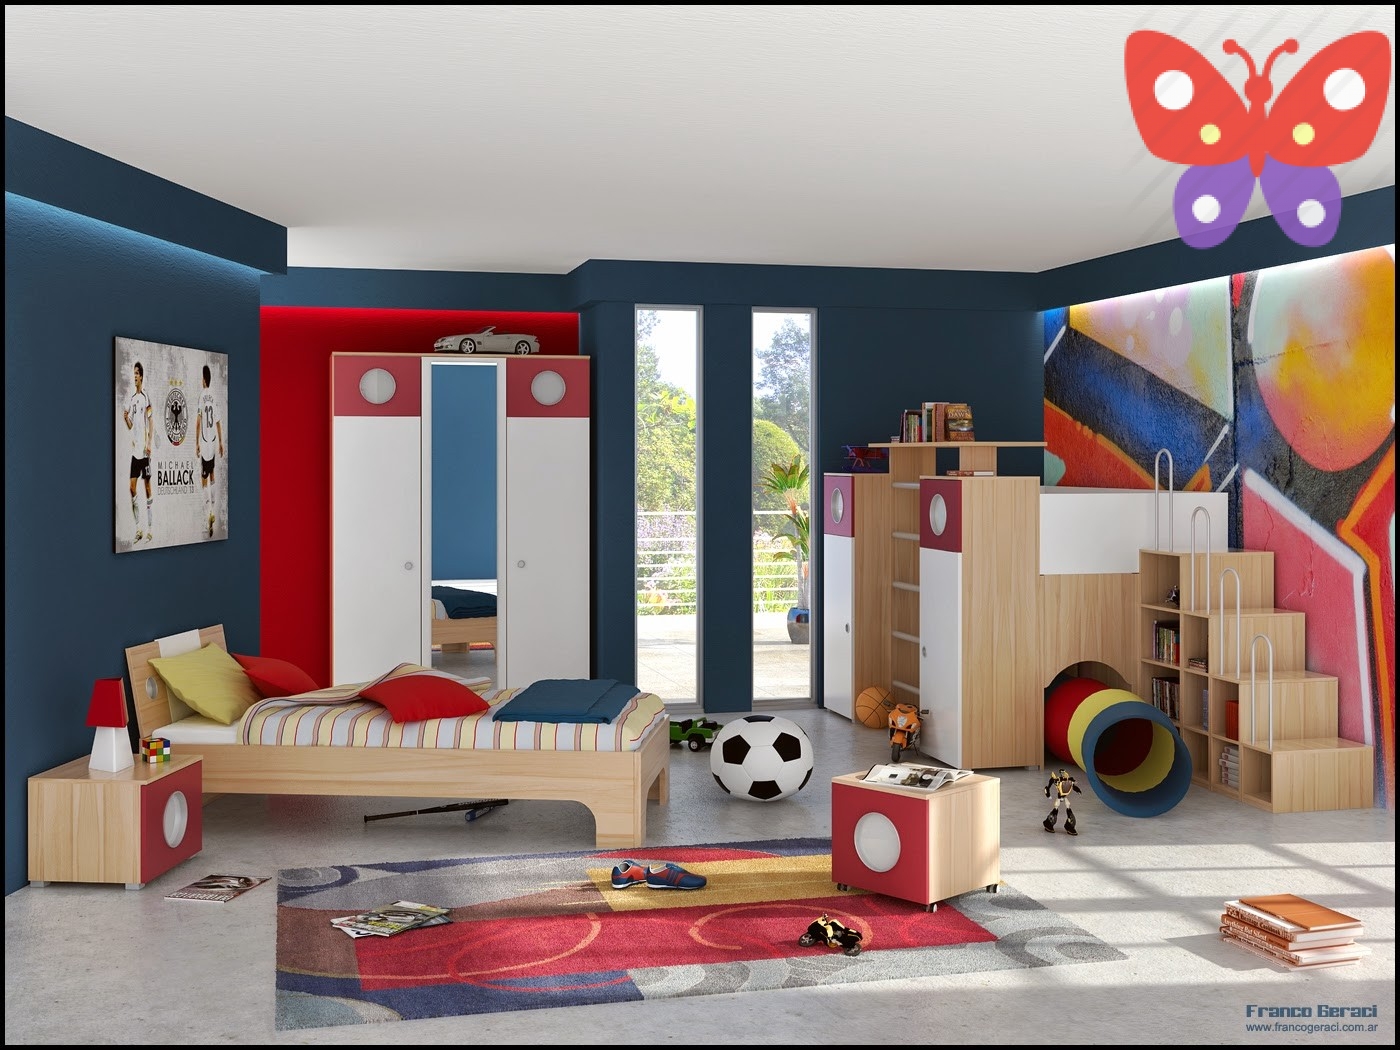 2Twin-Kids-Bedroom-Decorating-Ideas-for-Boys-Interior-Furniture-